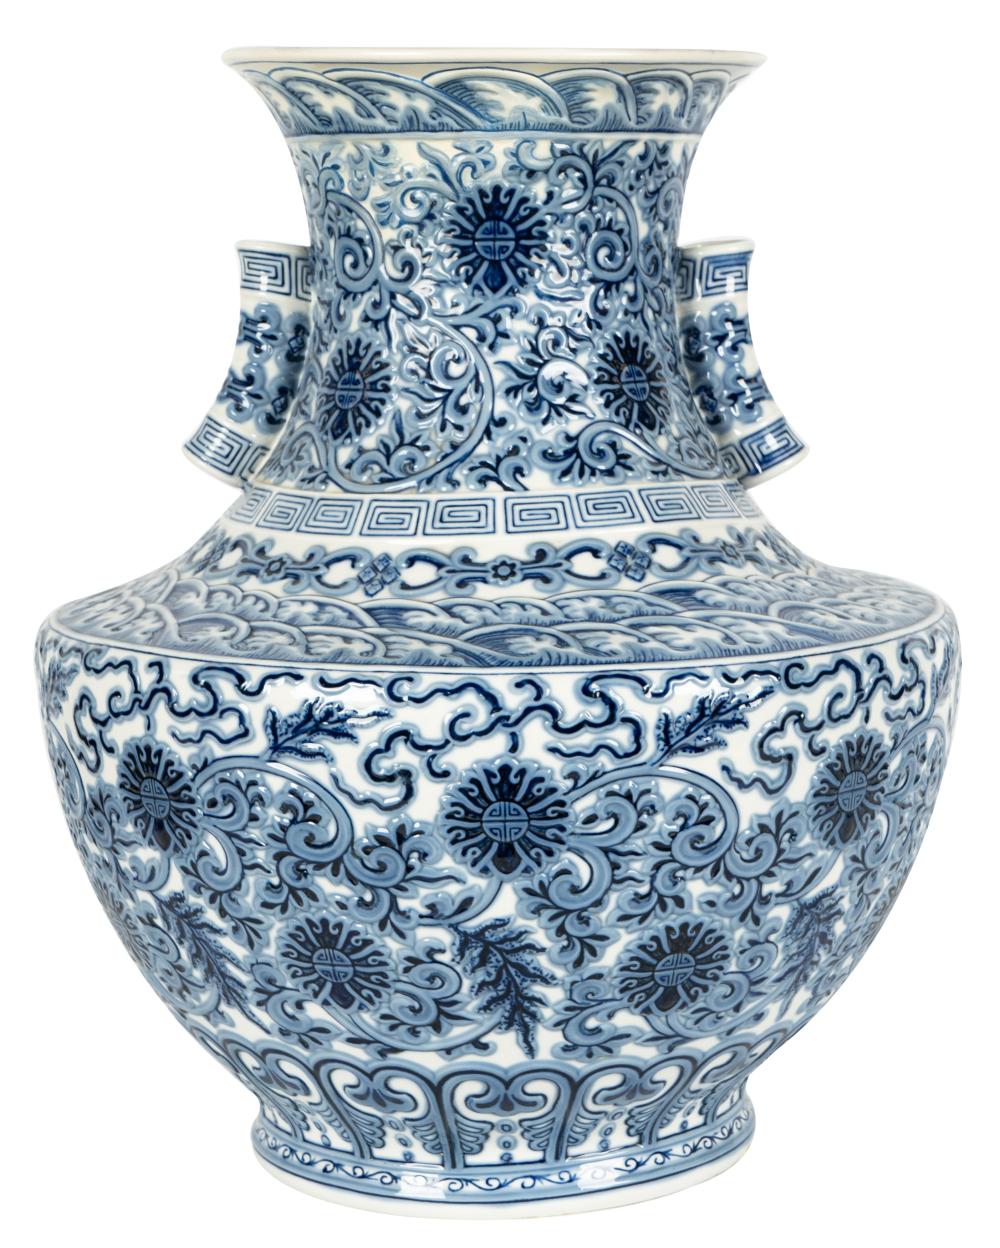 LLADRO CHINESE-STYLE BLUE AND WHITE